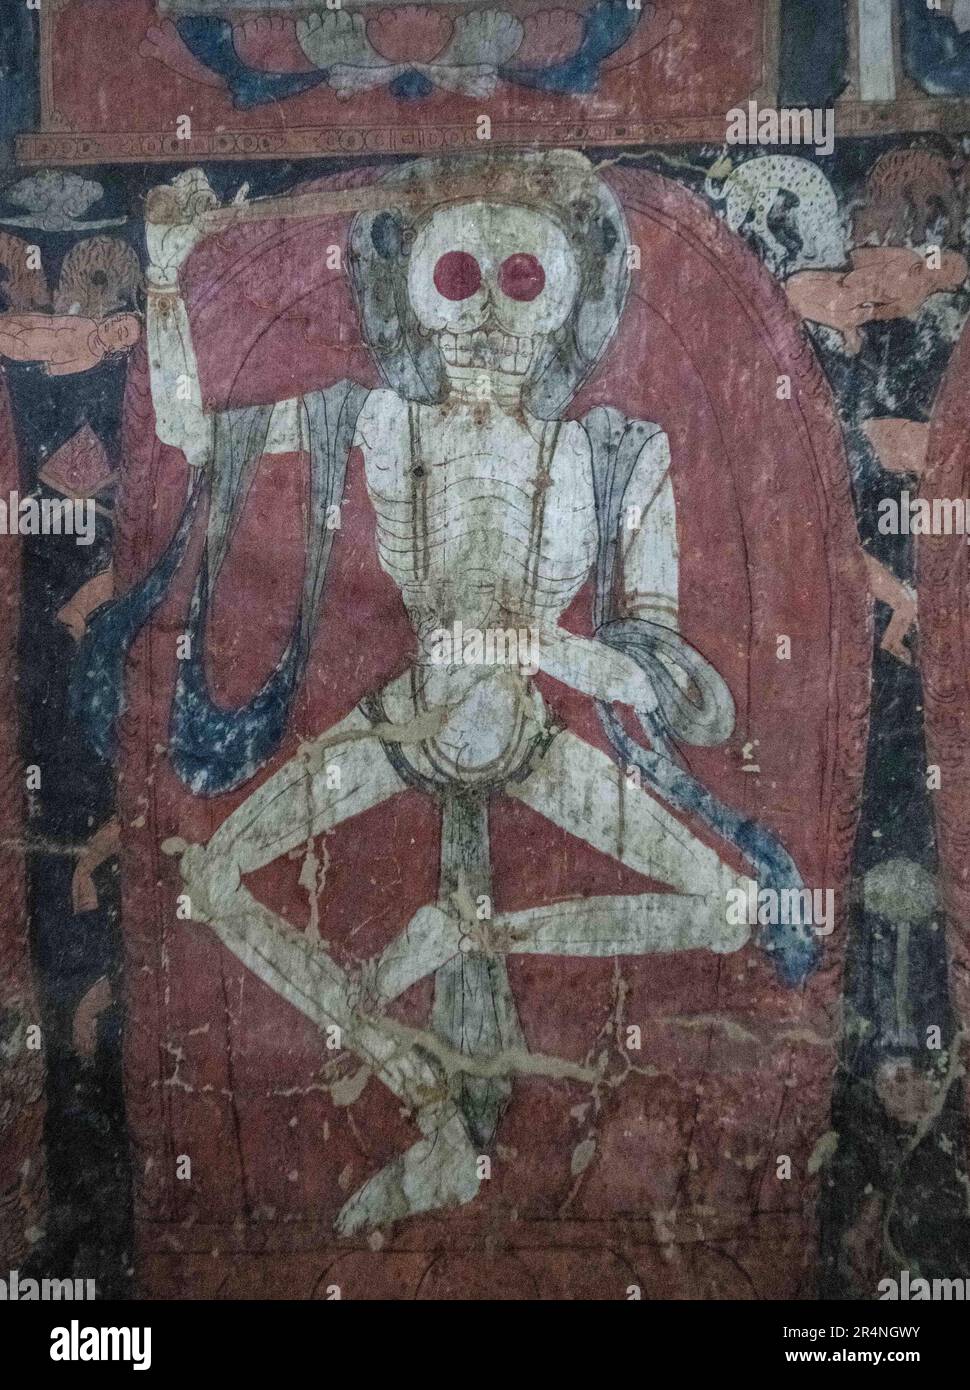 https://c8.alamy.com/comp/2R4NGWY/ngari-26th-may-2023-this-photo-taken-on-may-26-2023-shows-a-skeleton-in-a-mural-in-a-grotto-in-zanda-county-of-ngari-prefecture-southwest-chinas-tibet-autonomous-region-known-as-the-donggar-and-piyang-grottoes-the-1000-year-old-caverns-in-the-tibet-autonomous-regions-ngari-prefecture-hold-one-of-the-worlds-greatest-collections-of-tibetan-buddhist-murals-frescoes-that-are-currently-open-to-the-public-mainly-depict-buddhas-bodhisattvas-and-other-deities-but-also-feature-animals-that-are-not-native-to-ngari-credit-jigme-dorjexinhuaalamy-live-news-2R4NGWY.jpg